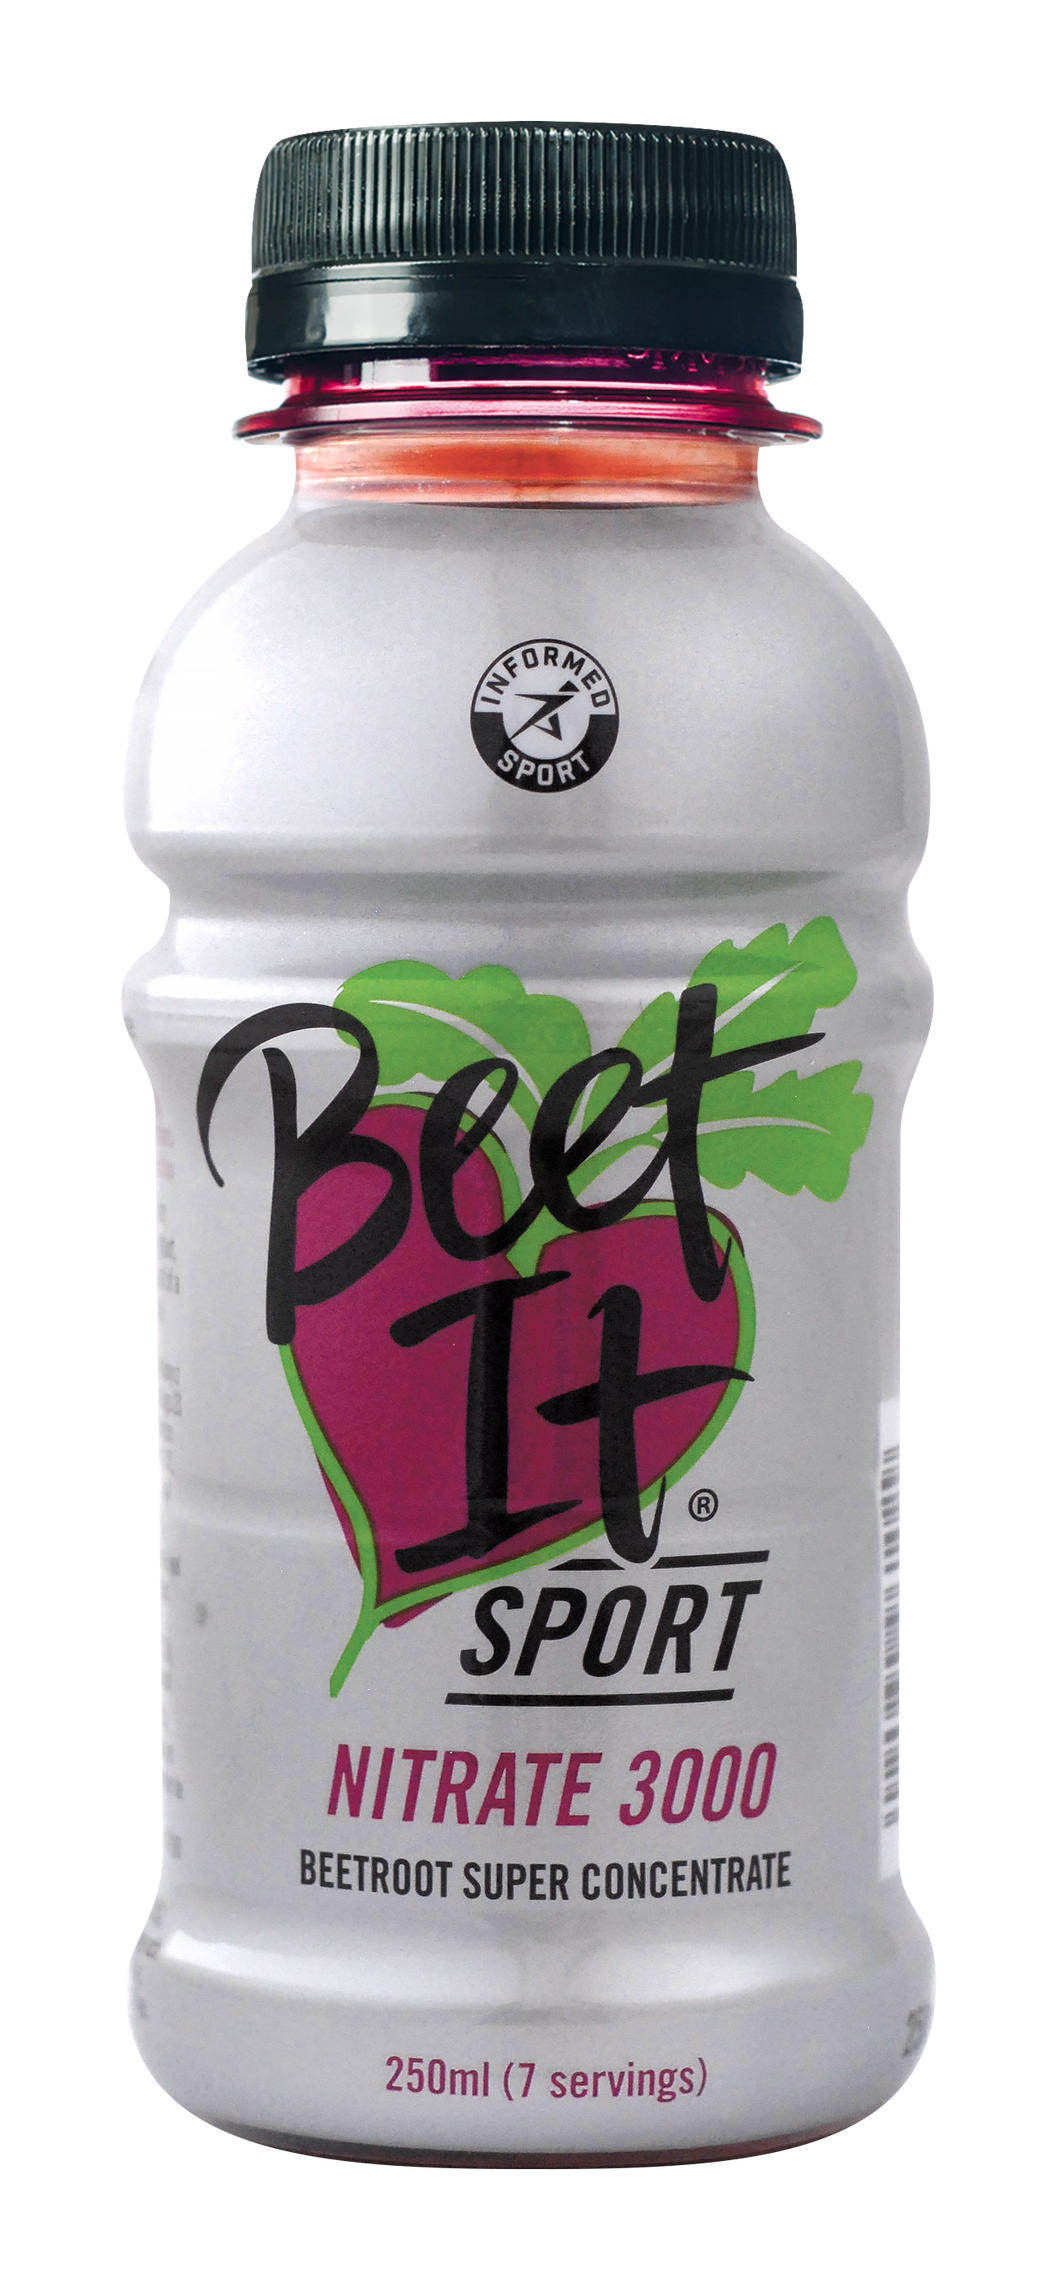 Beet It Sport Nitrate 3000 Super Concentrate - 3 Box 18x250ml